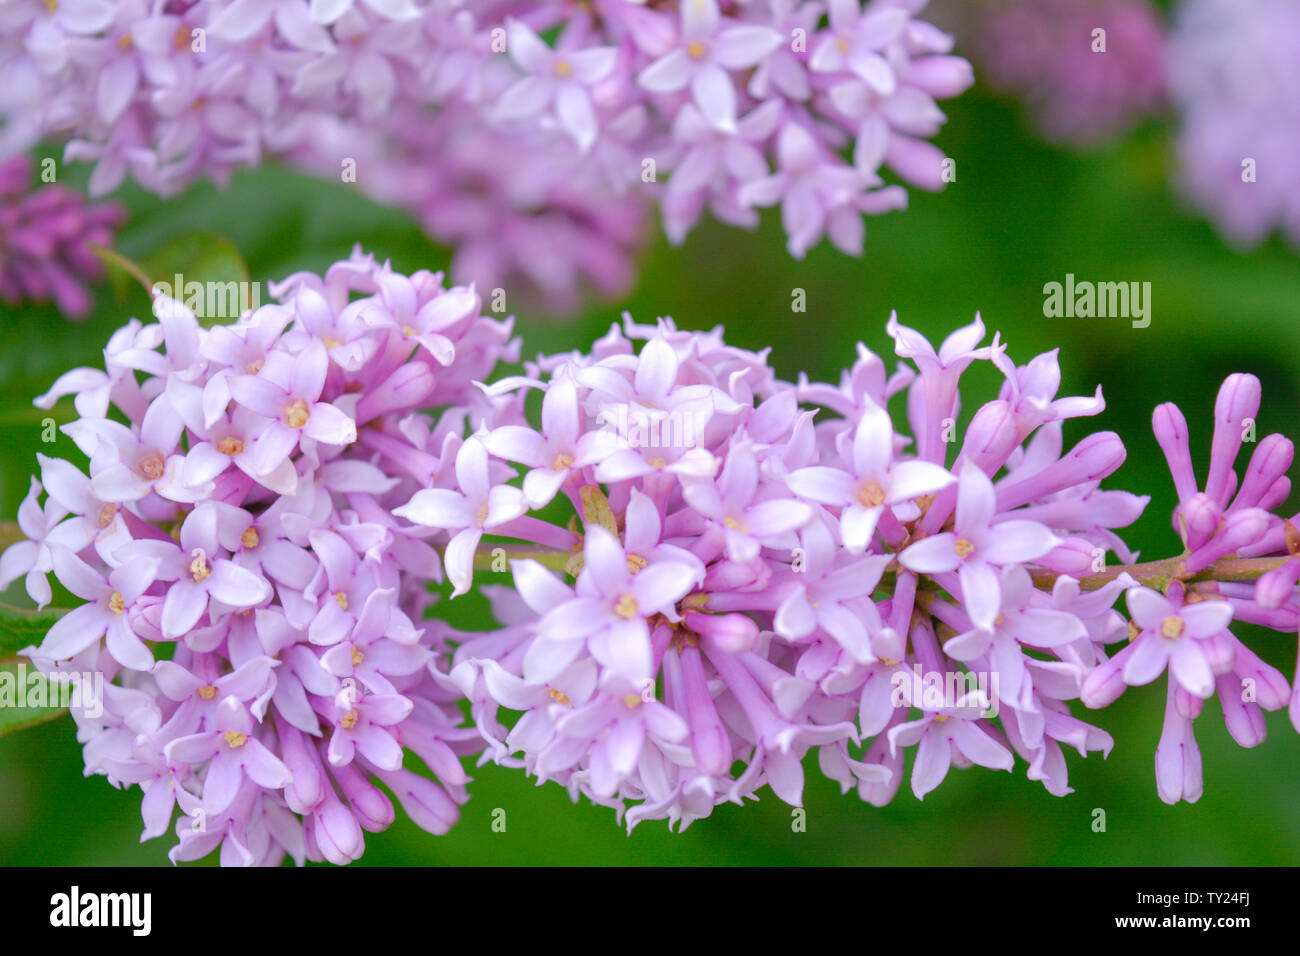 Lilac shrub flowers blooming in spring garden. Common lilac Syringa vulgaris bush. Close-up with soft focus of a branch on a lilac tree Stock Photo